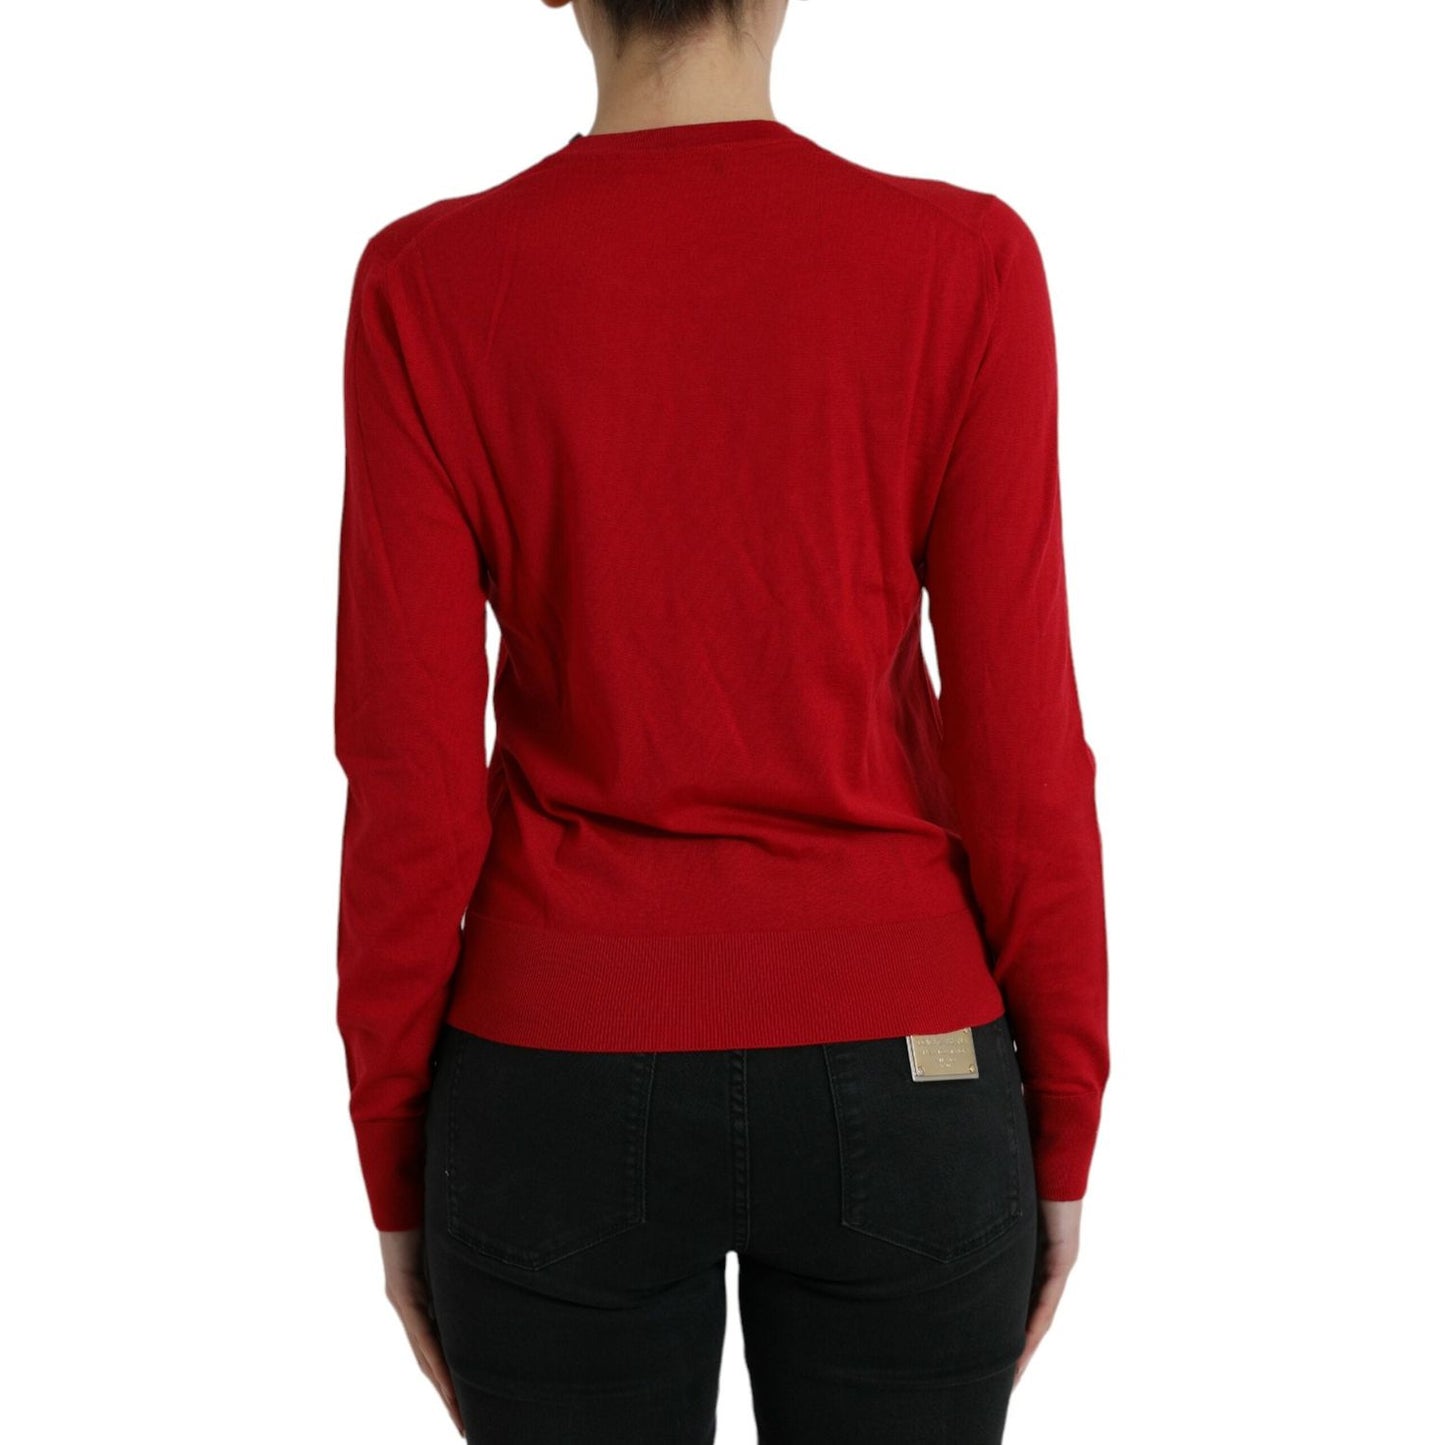 Dolce & Gabbana Radiant Red Wool Pullover Sweater red-wool-knitted-crew-neck-pullover-sweater